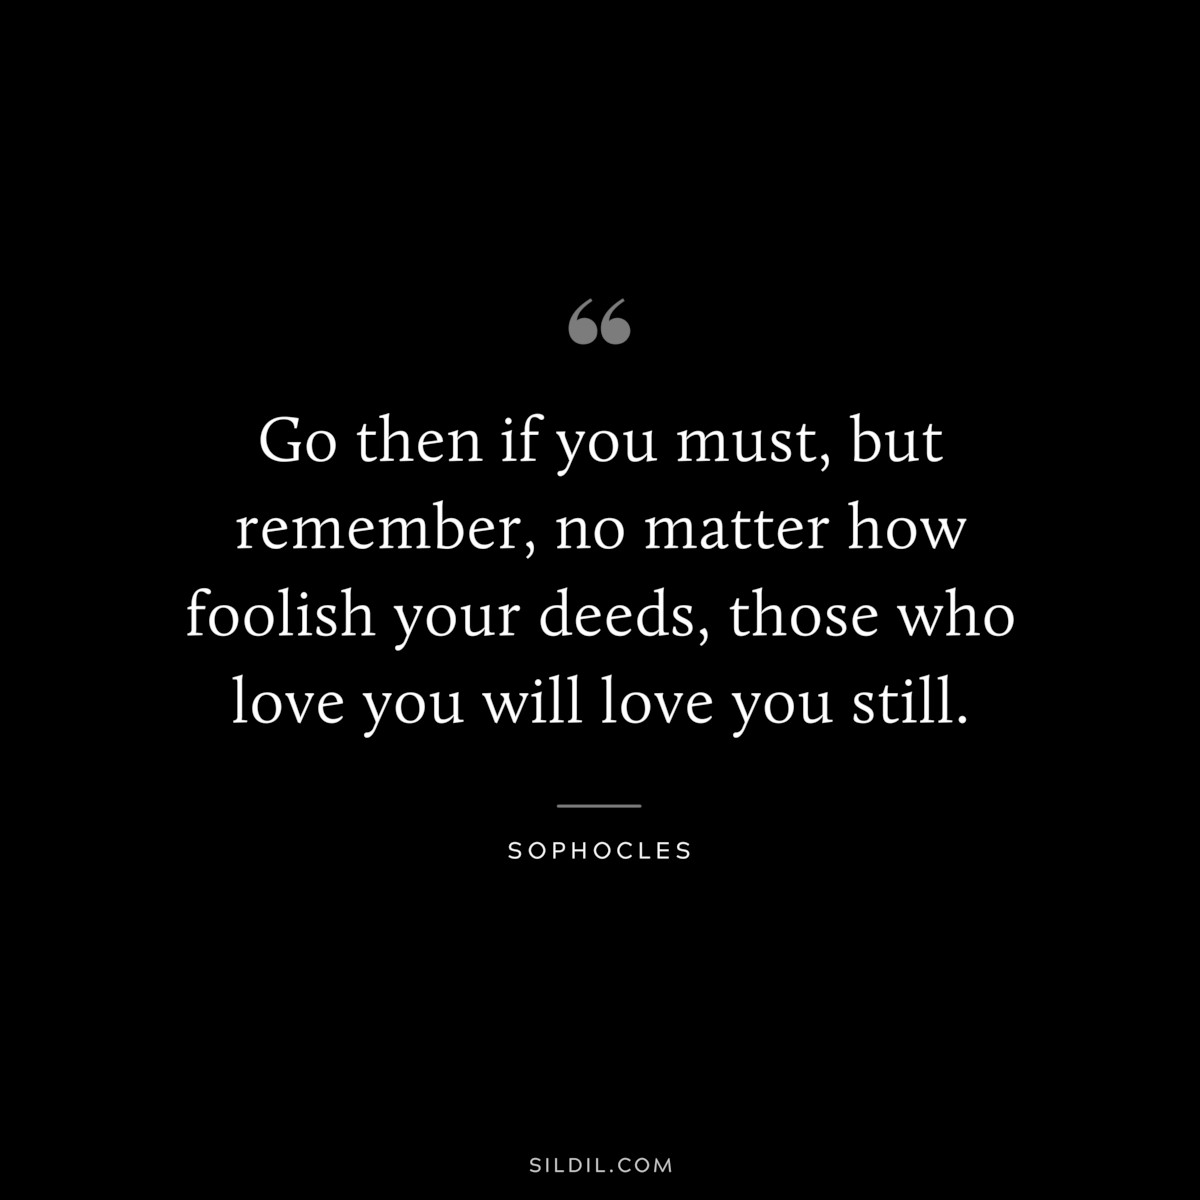 Go then if you must, but remember, no matter how foolish your deeds, those who love you will love you still. ― Sophocles